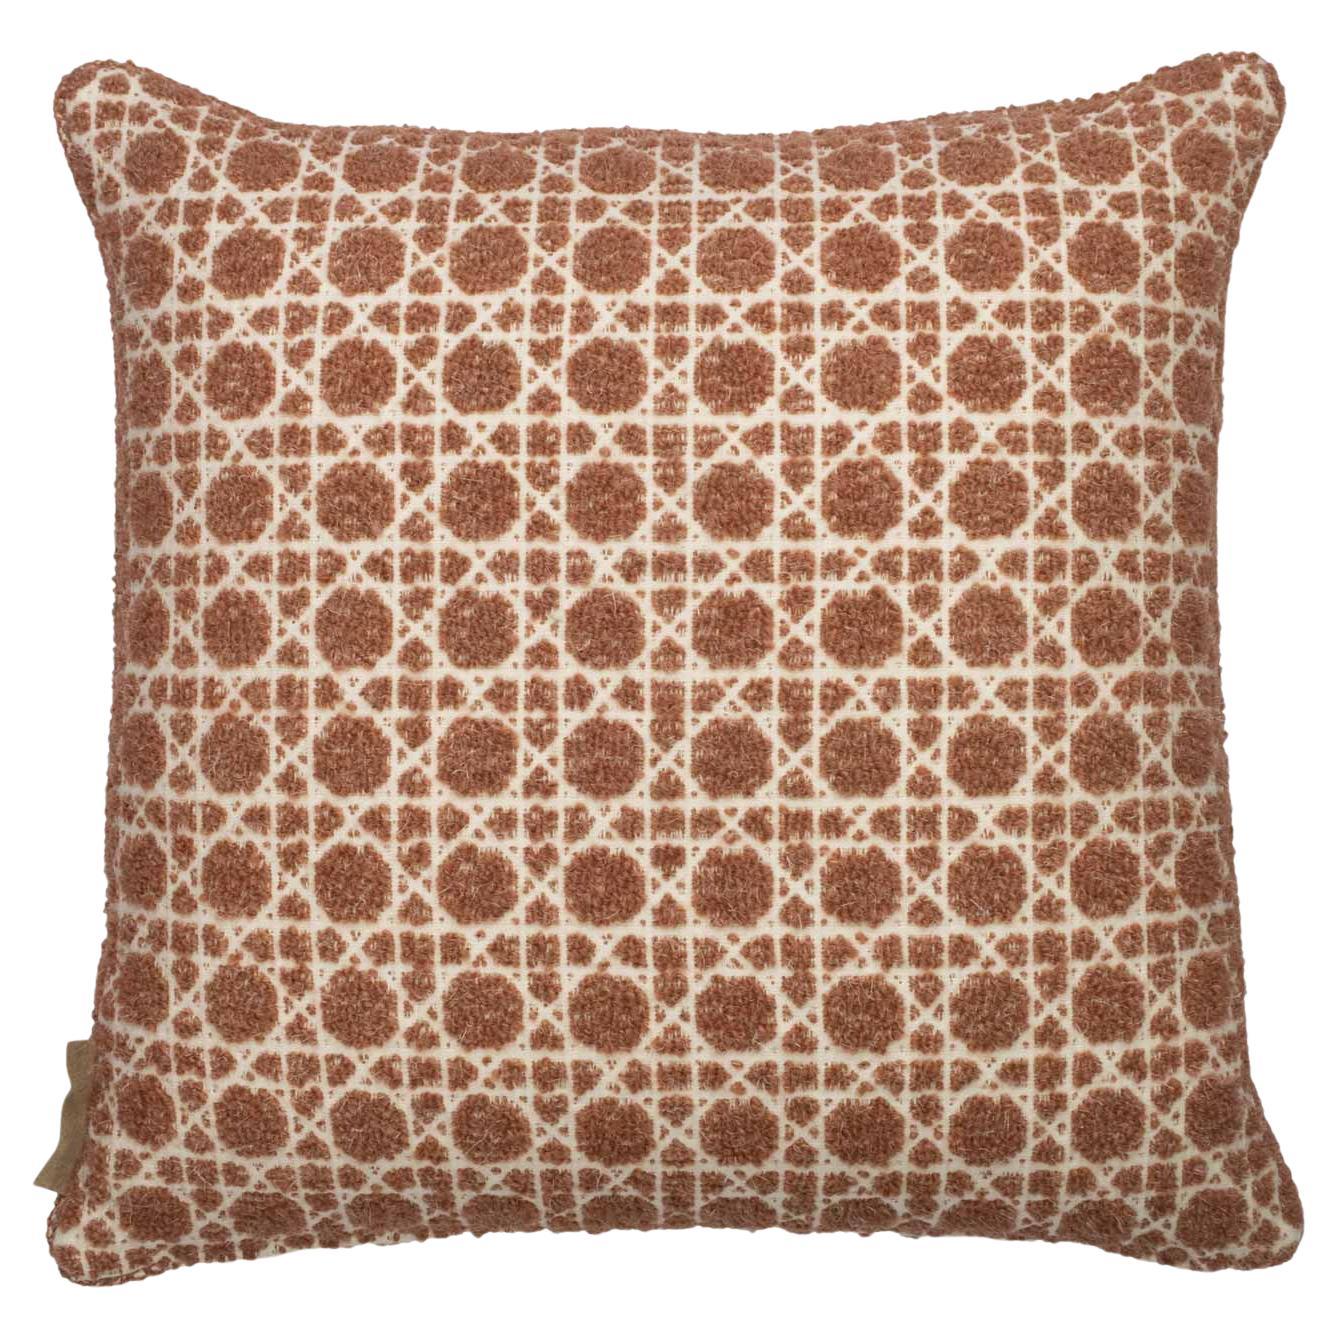 Modern Textured Patterned Throw Pillow Pink "Cannage" by Evolution21 For Sale